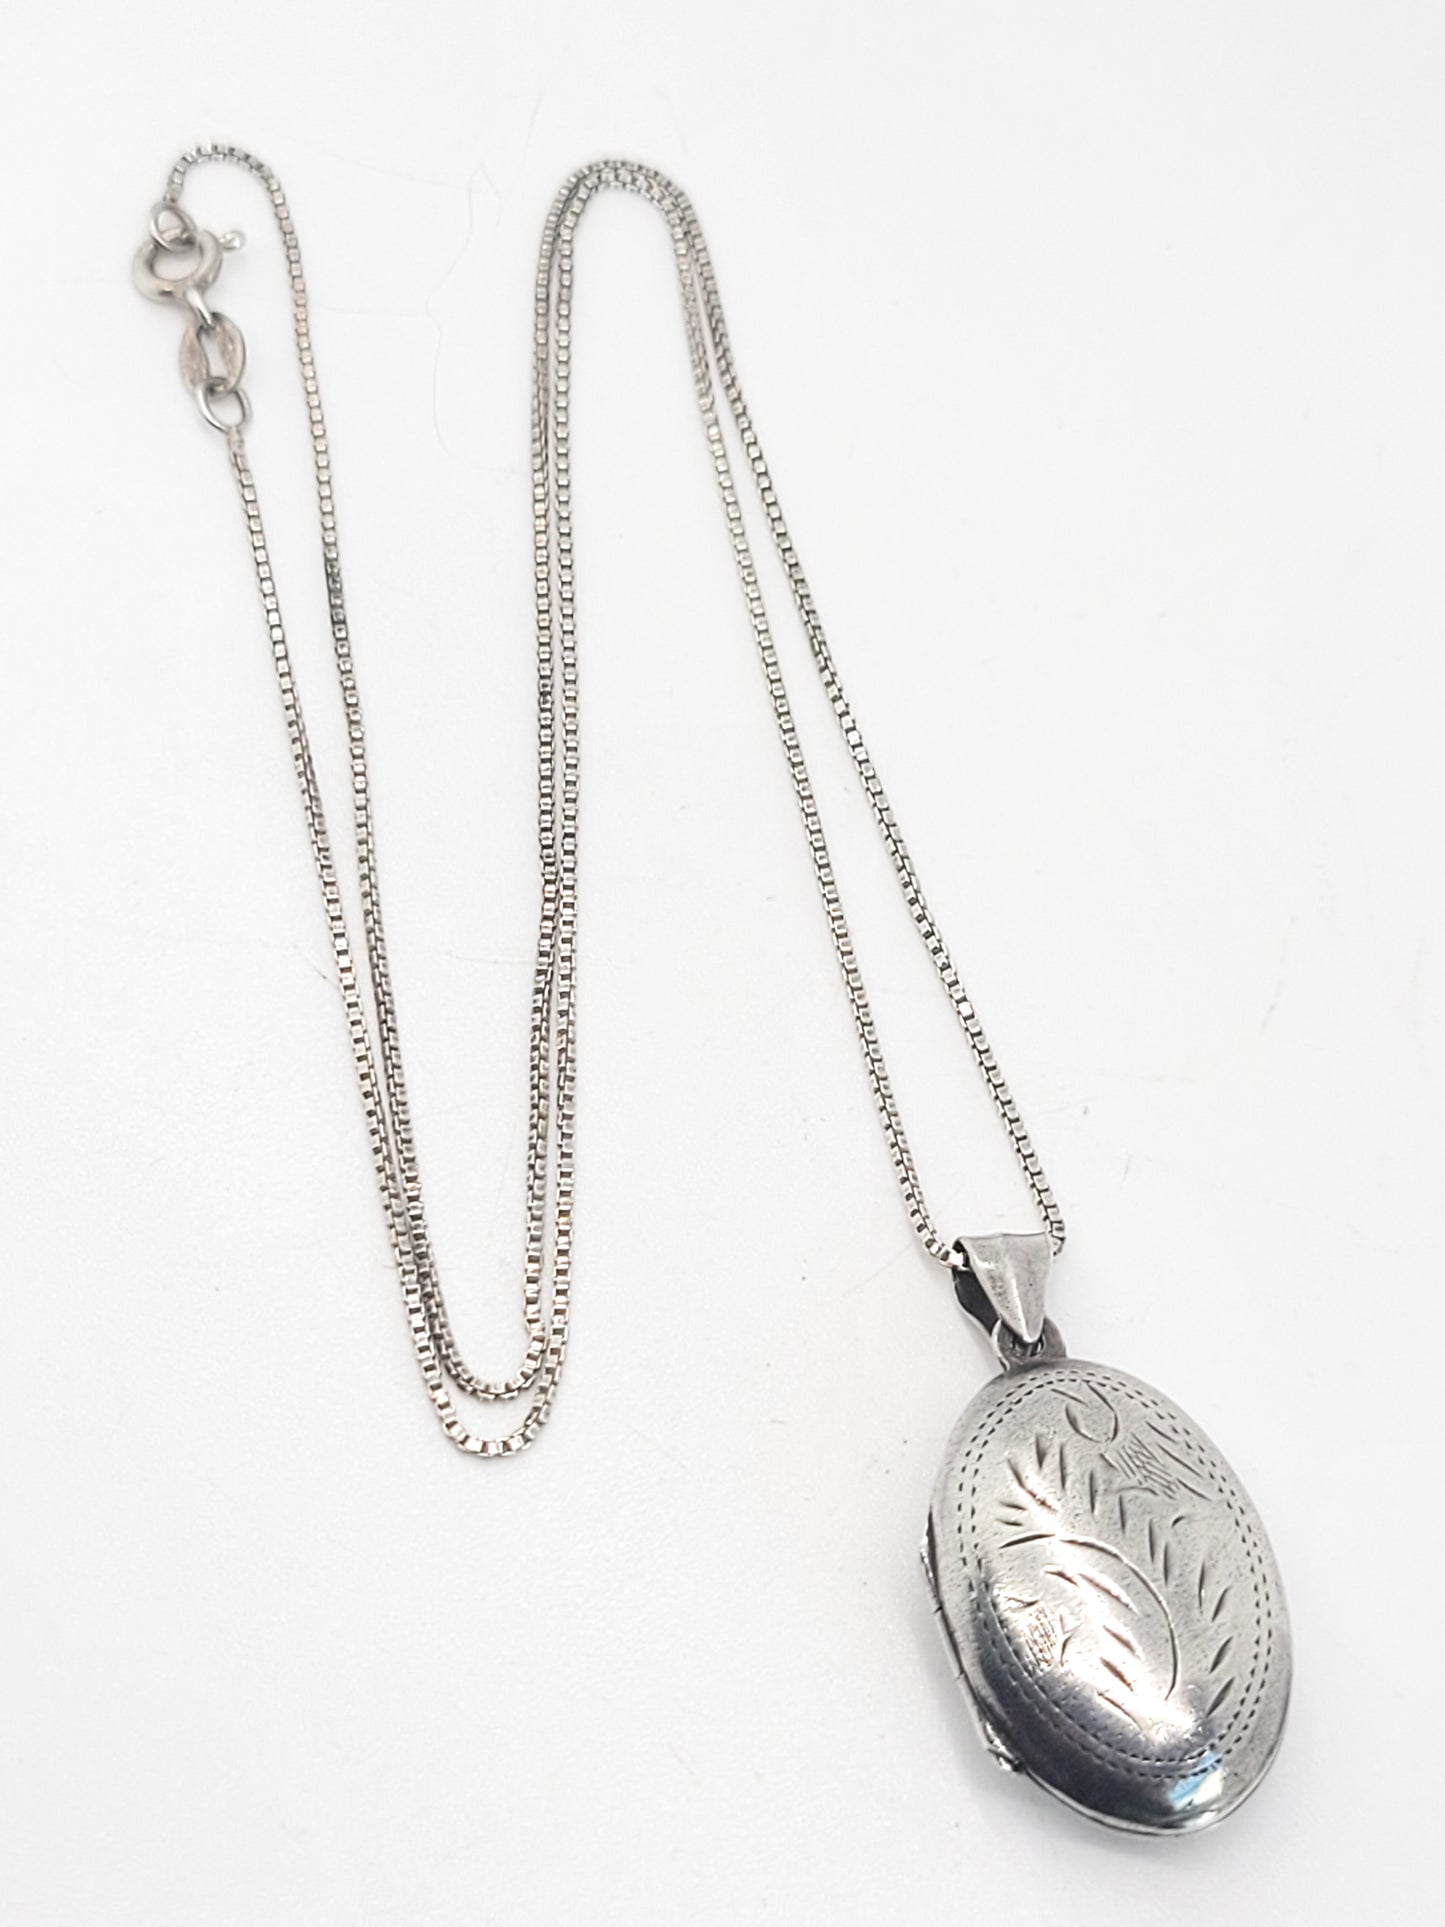 Locket small oval vintage etched sterling silver locket necklace